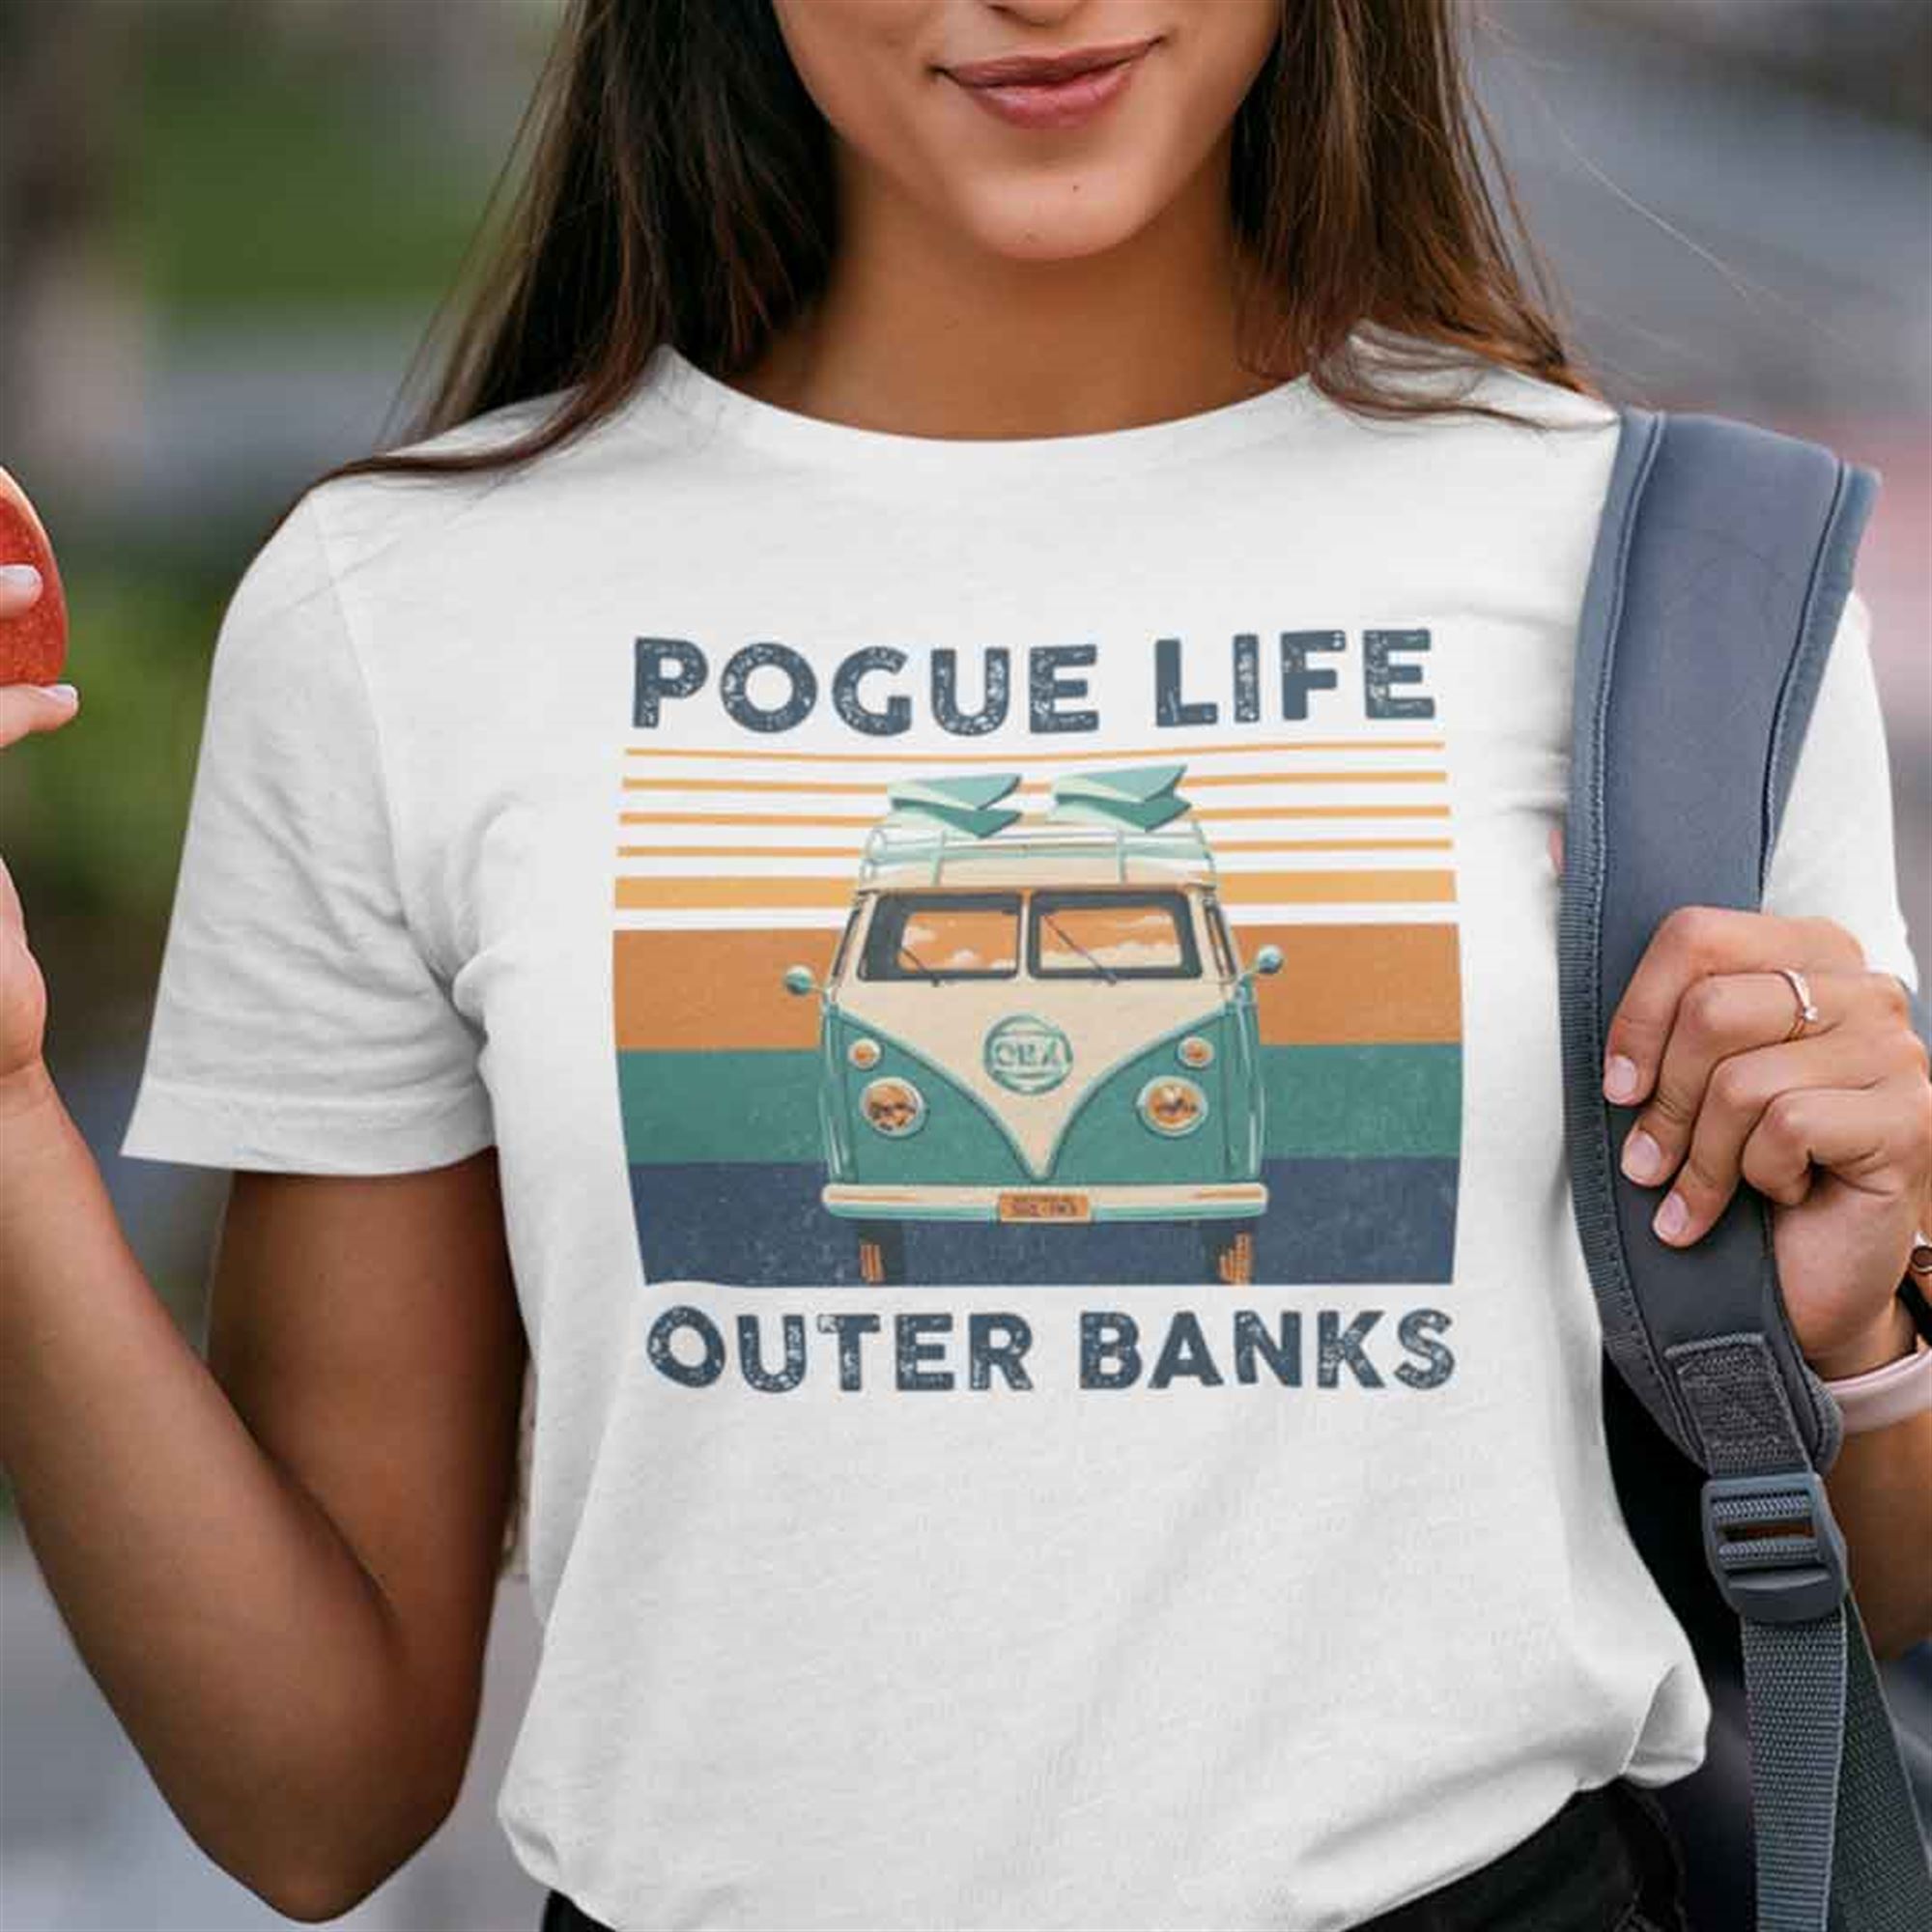 Pogue Life Outer Banks Shirt Obx T-shirt Full Size Up To 5xl